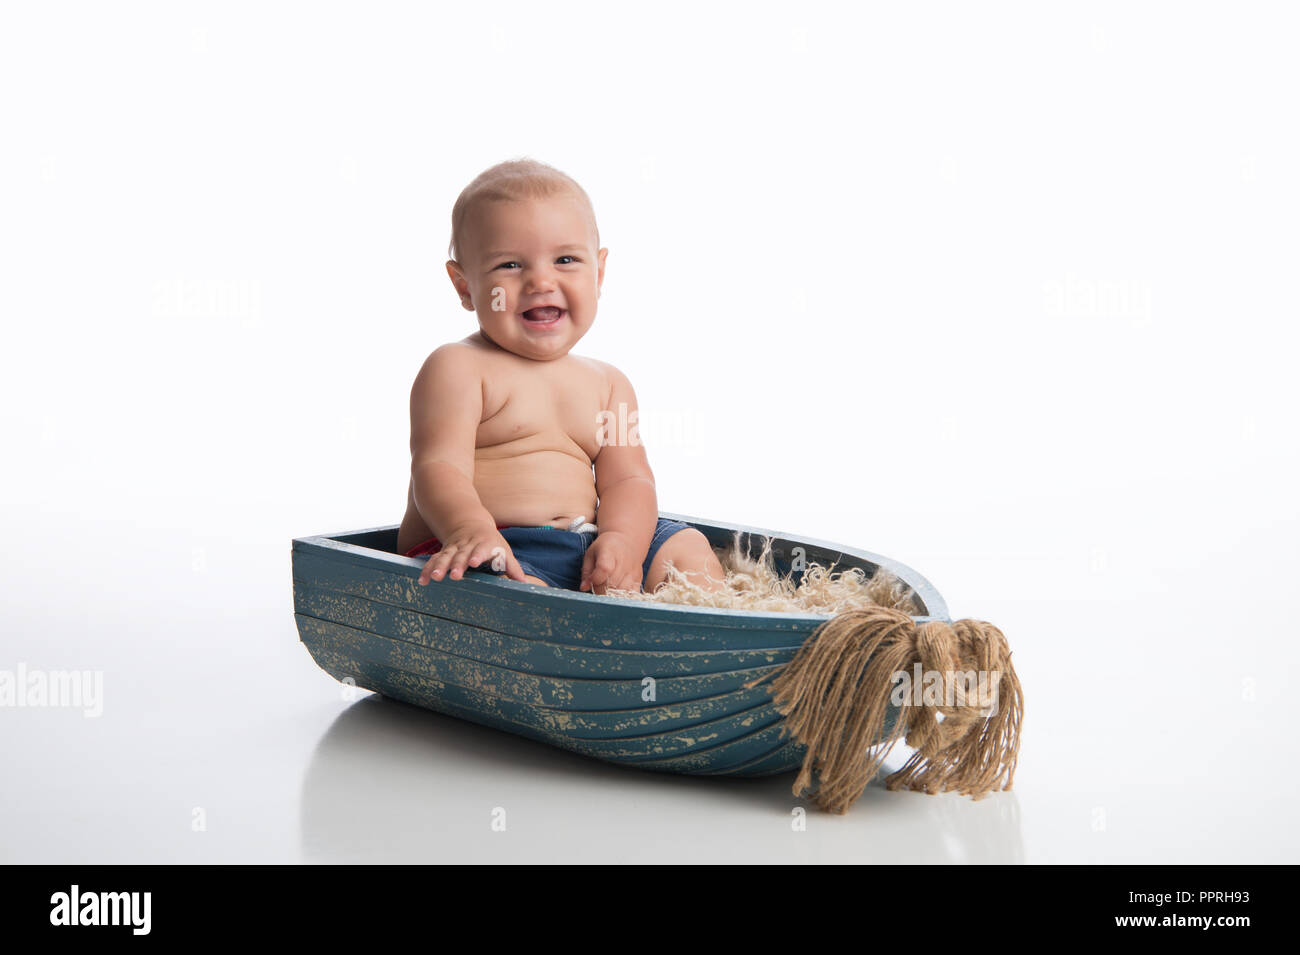 A smiling seven month old baby boy sitting in a rustic, wooden bowl. Shot in the studio on a white, seamless backdrop. Stock Photo